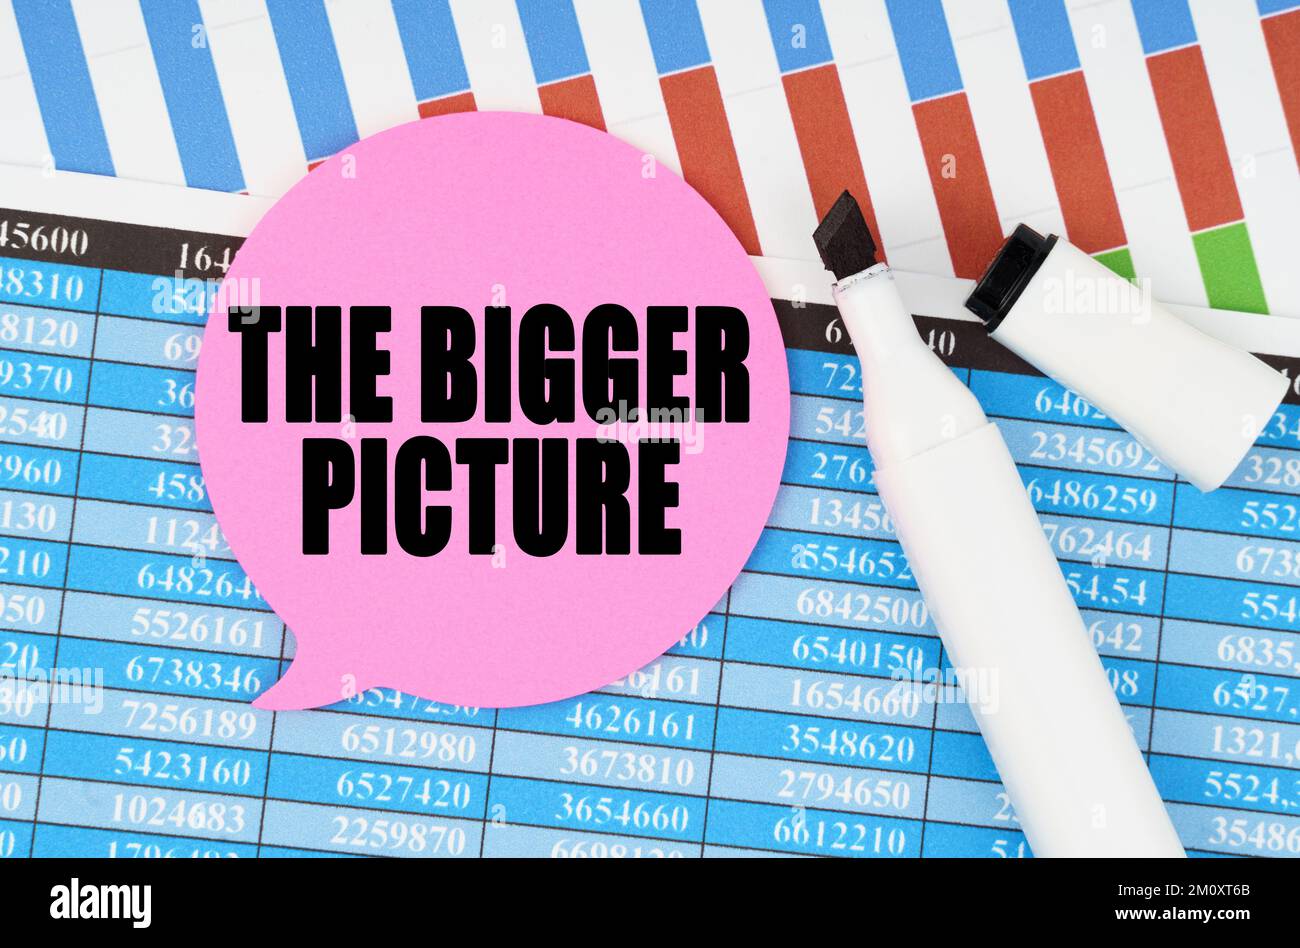 Business and economics concept. On financial statements and charts there is a marker and a sticker with the inscription - THE BIGGER PICTURE Stock Photo